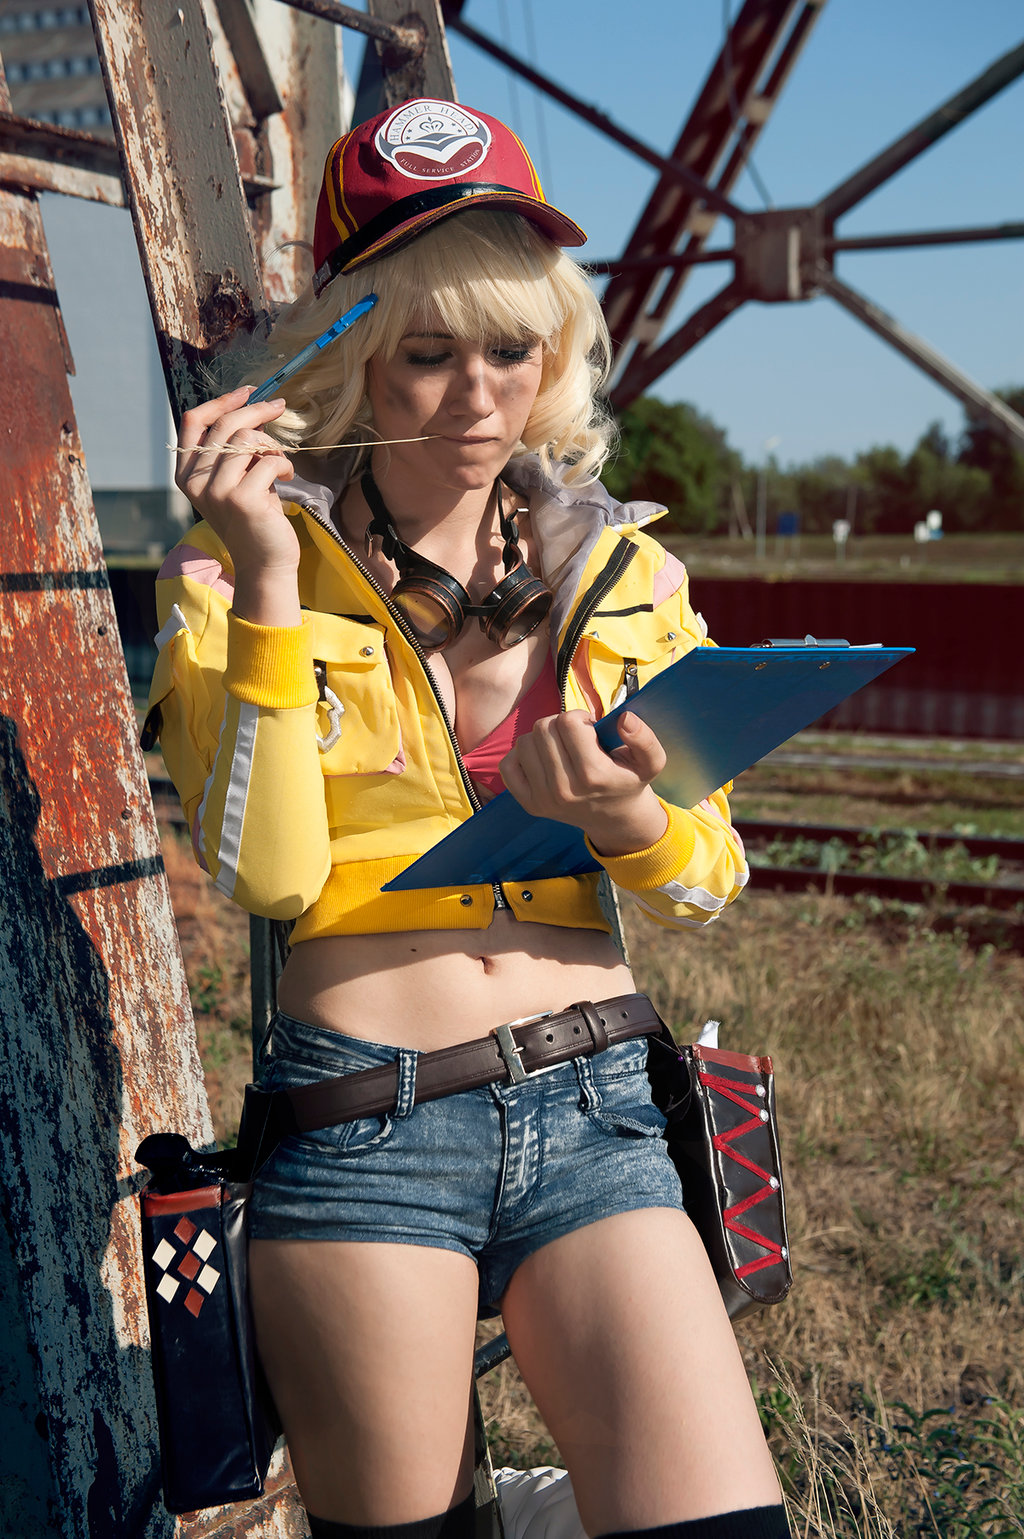 Cindy Ffxv Mechanic Porn - Final fantasy xv cindy cosplay - Naked pictures